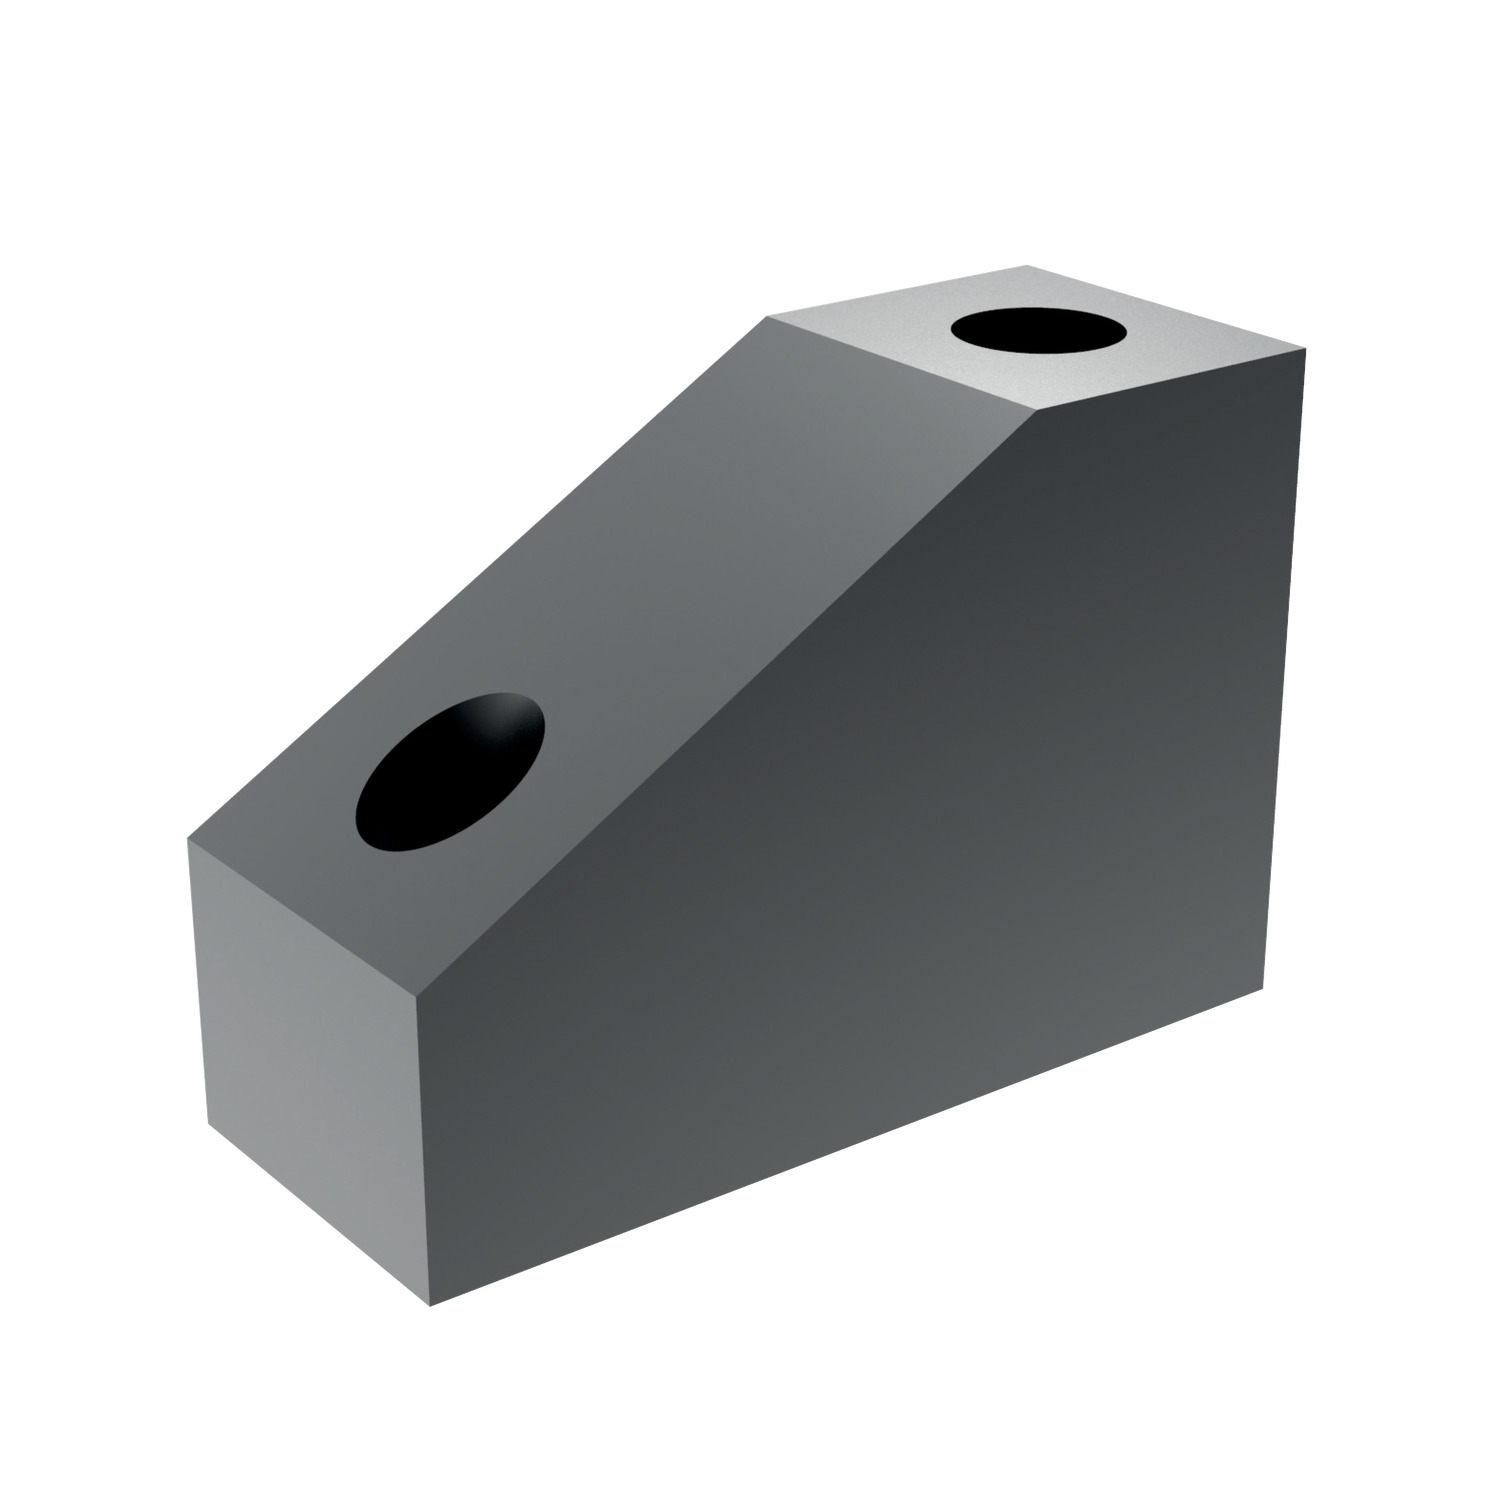 Angle Block - 120° Angle block for chain clamp set 12700. Ideal for use when clamping components. Sold as individual pieces.